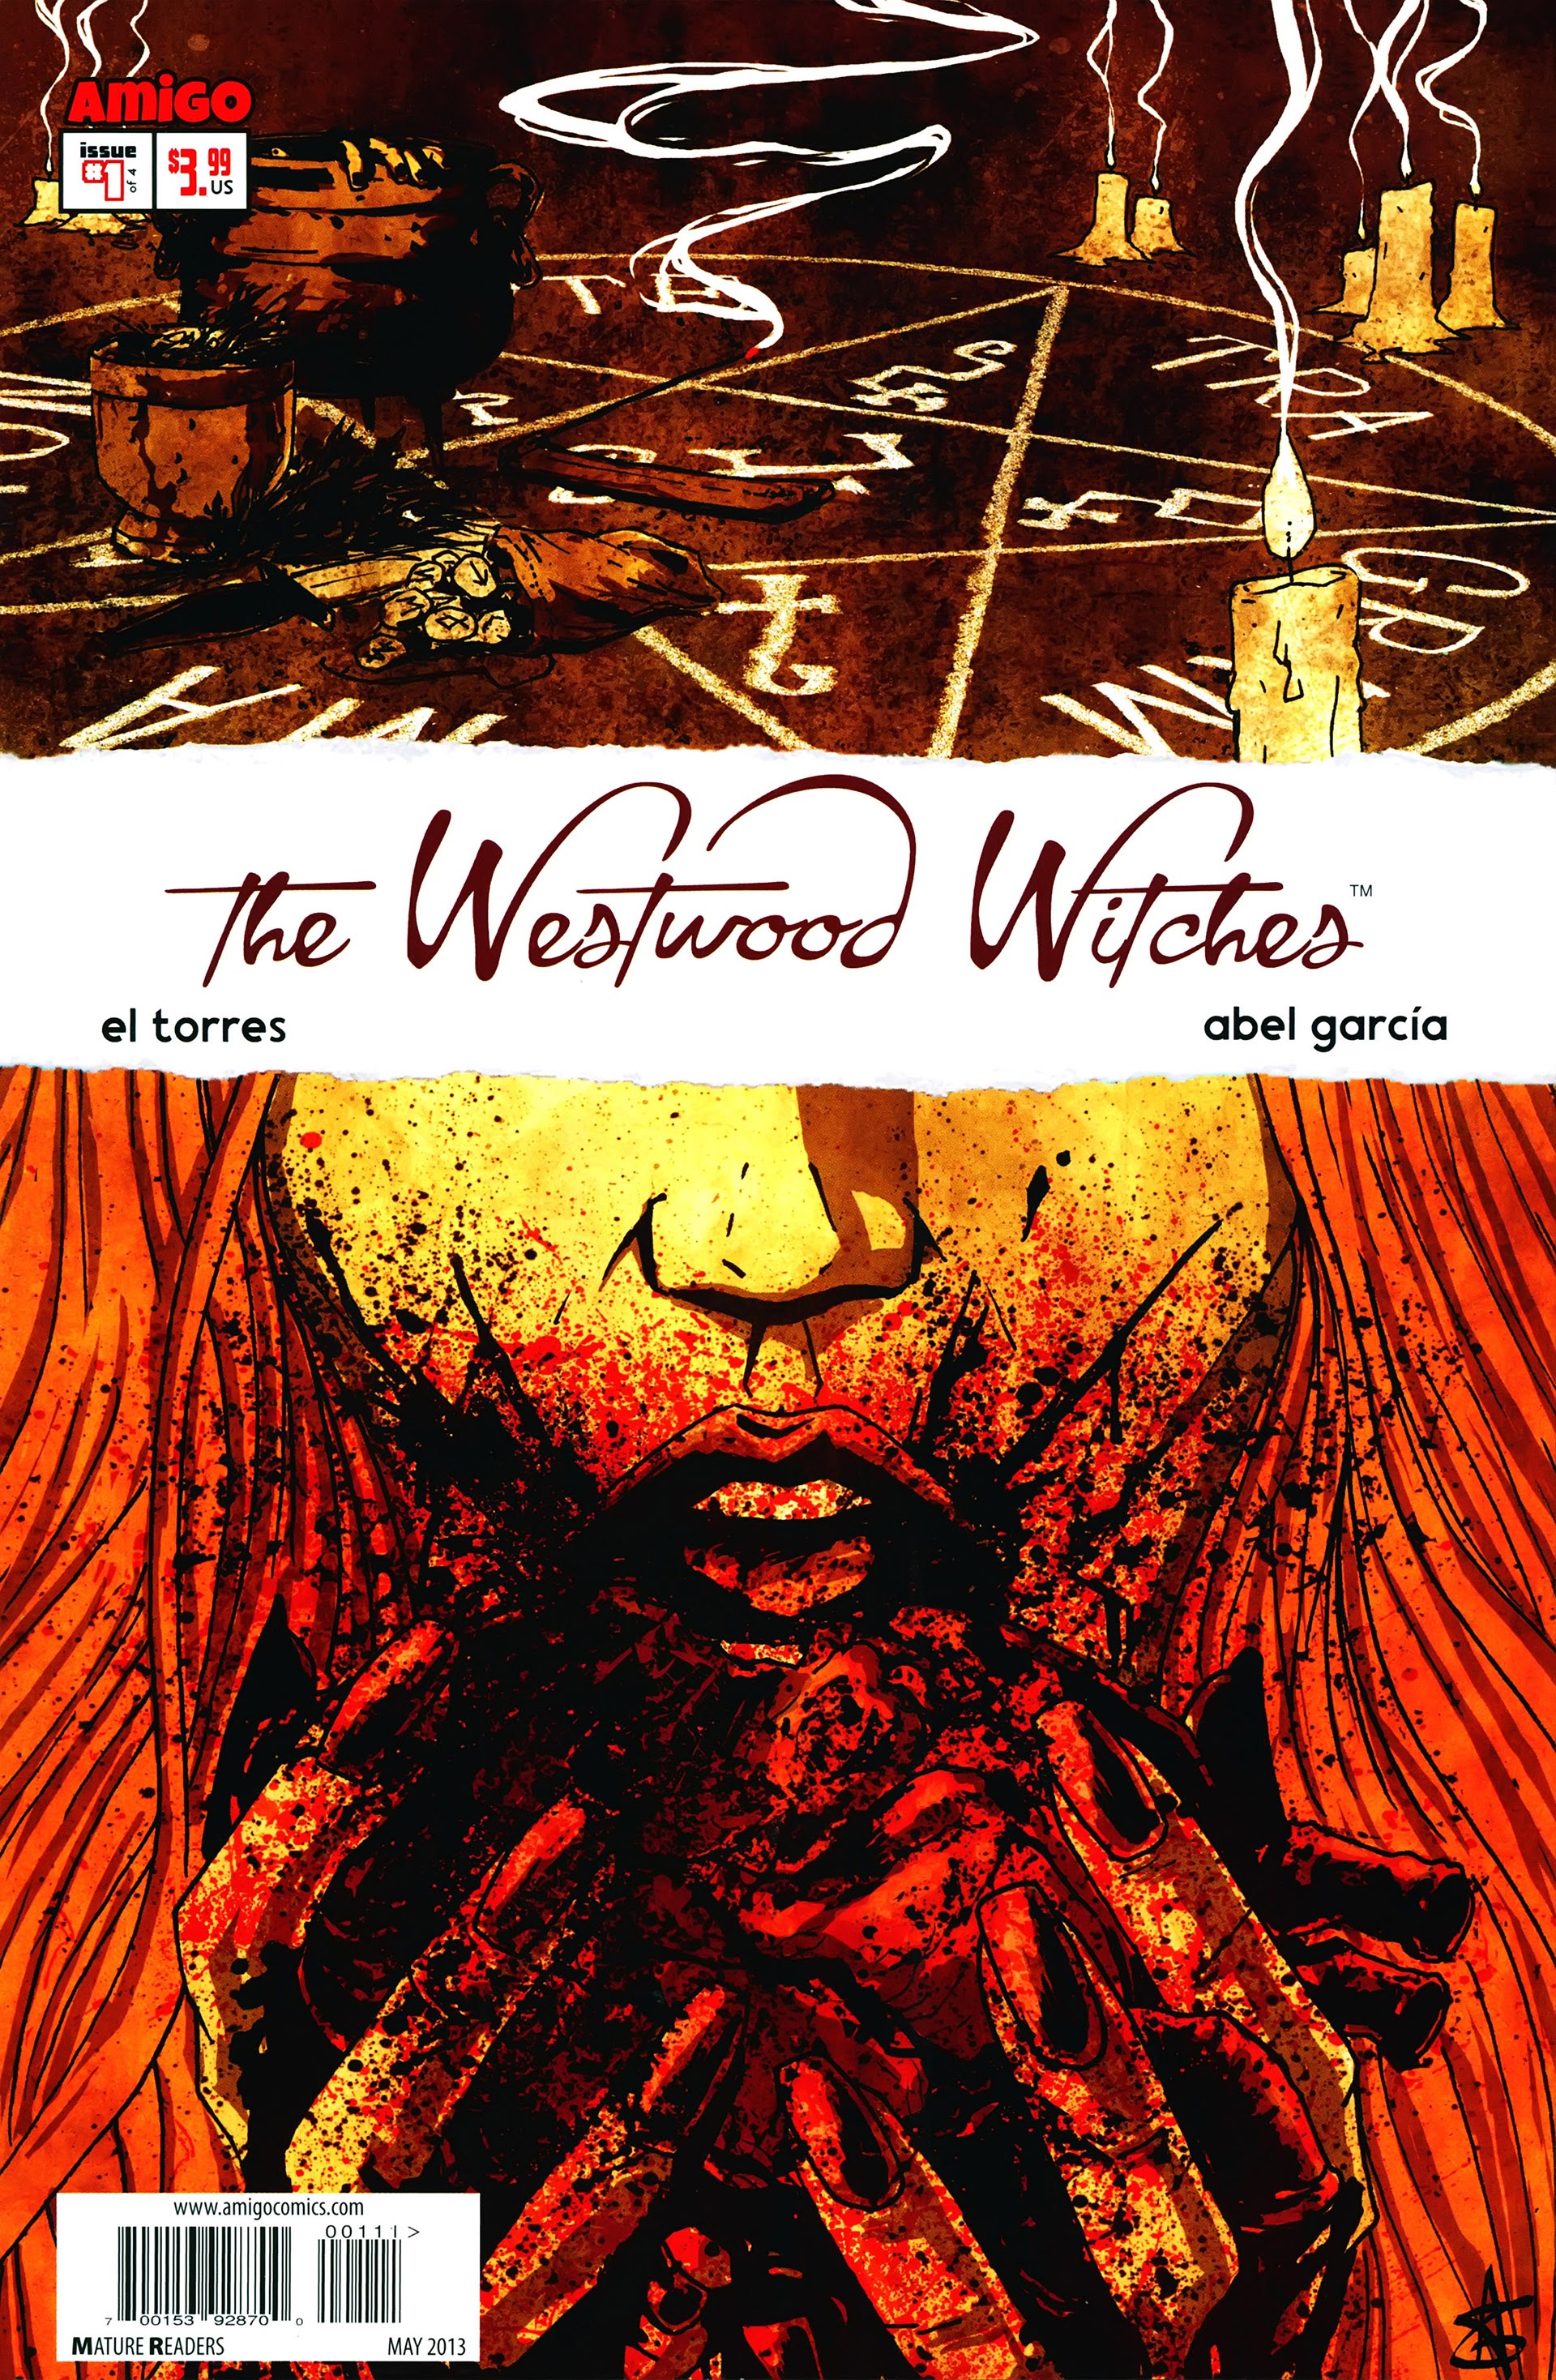 Read online The Westwood Witches comic -  Issue #1 - 1